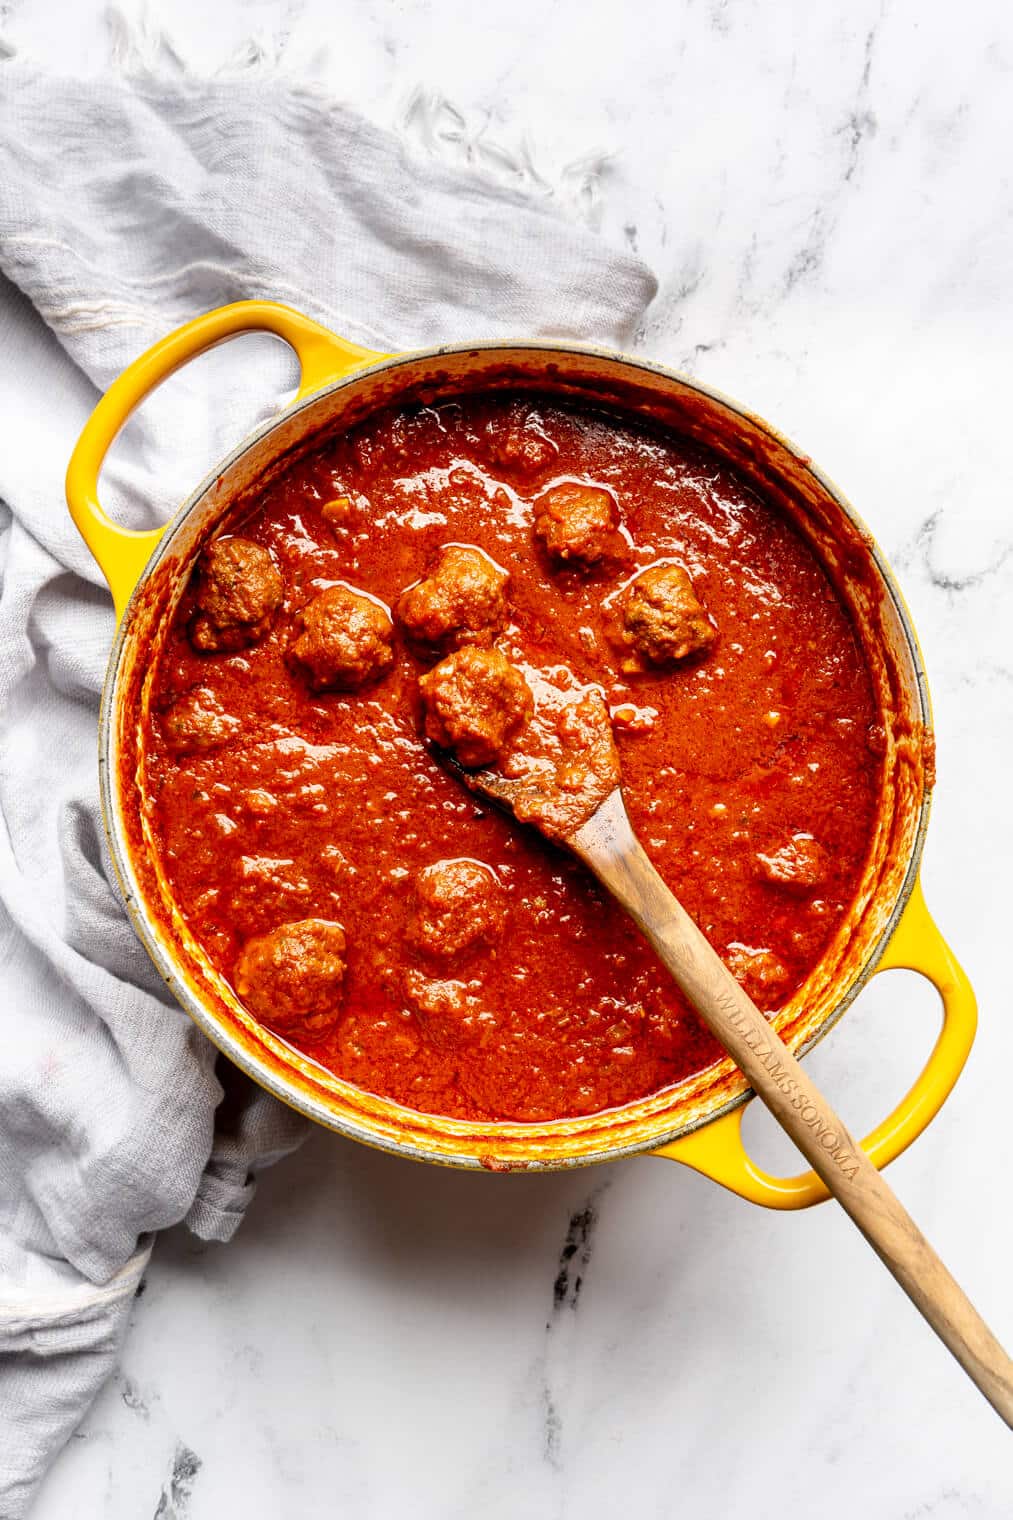 Cooked meatballs in a red sauce in a yellow dutch oven.